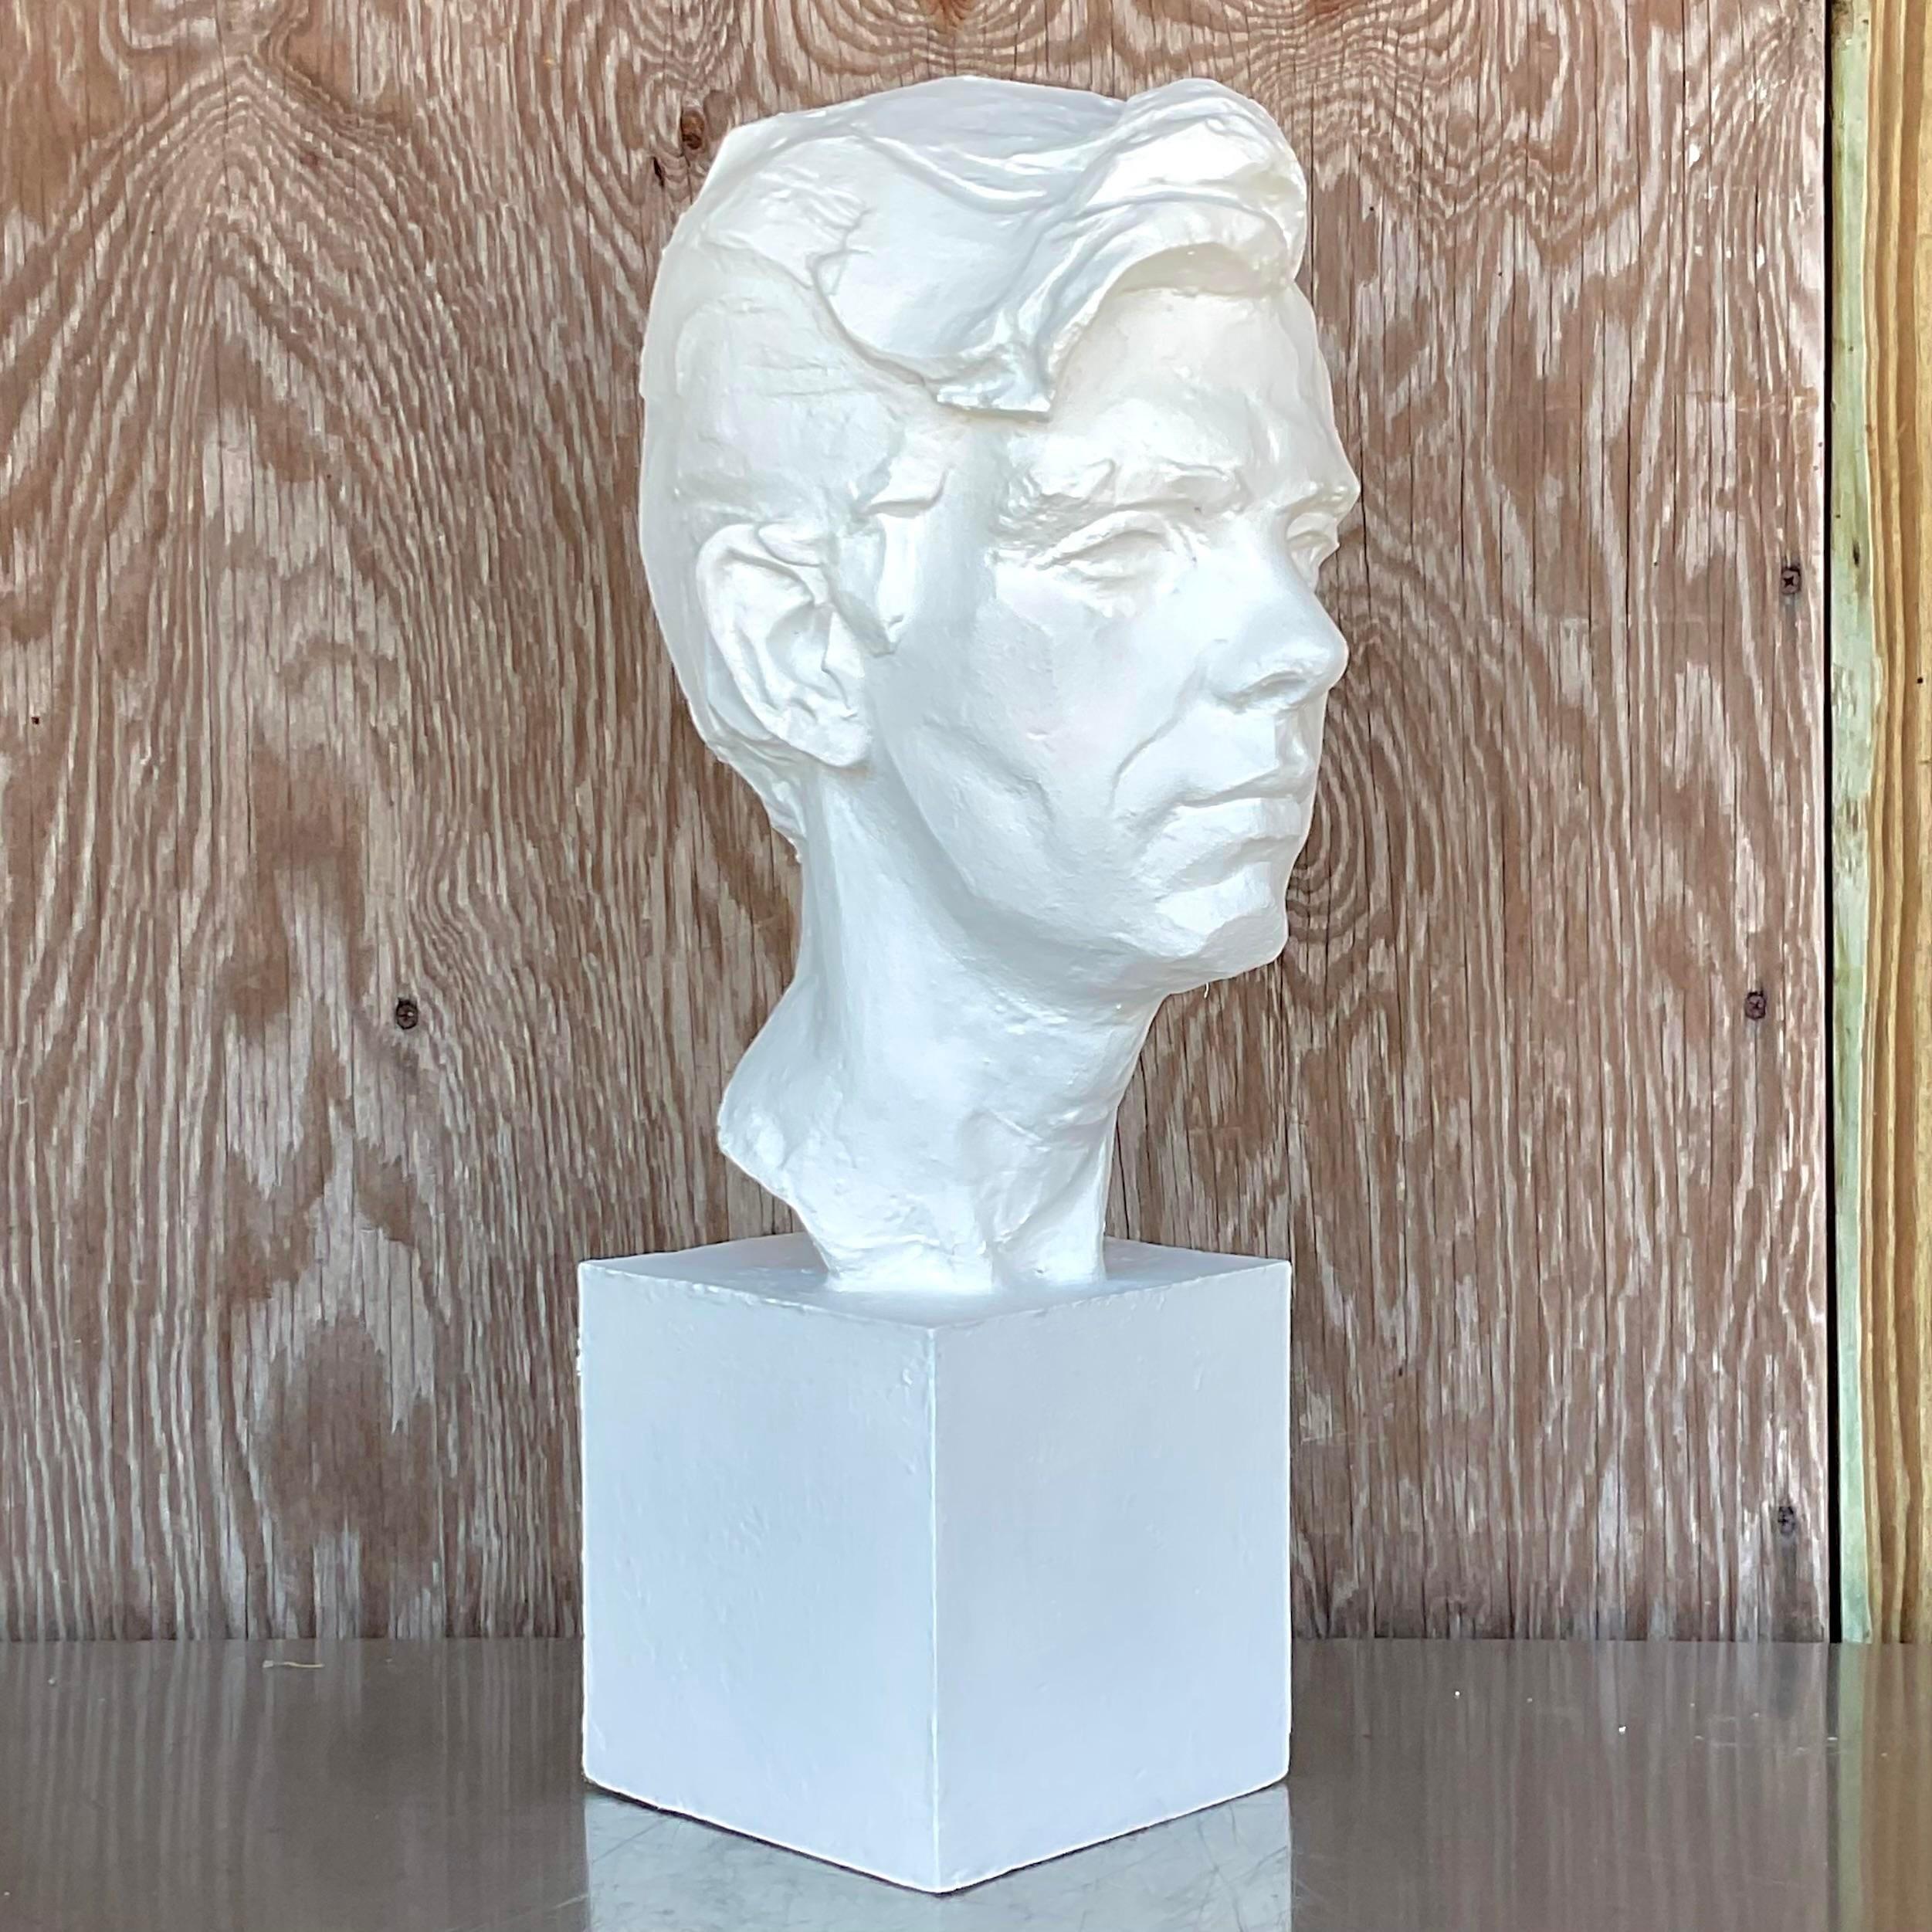 American Vintage Realist Plaster Bust of a Man Sculpture